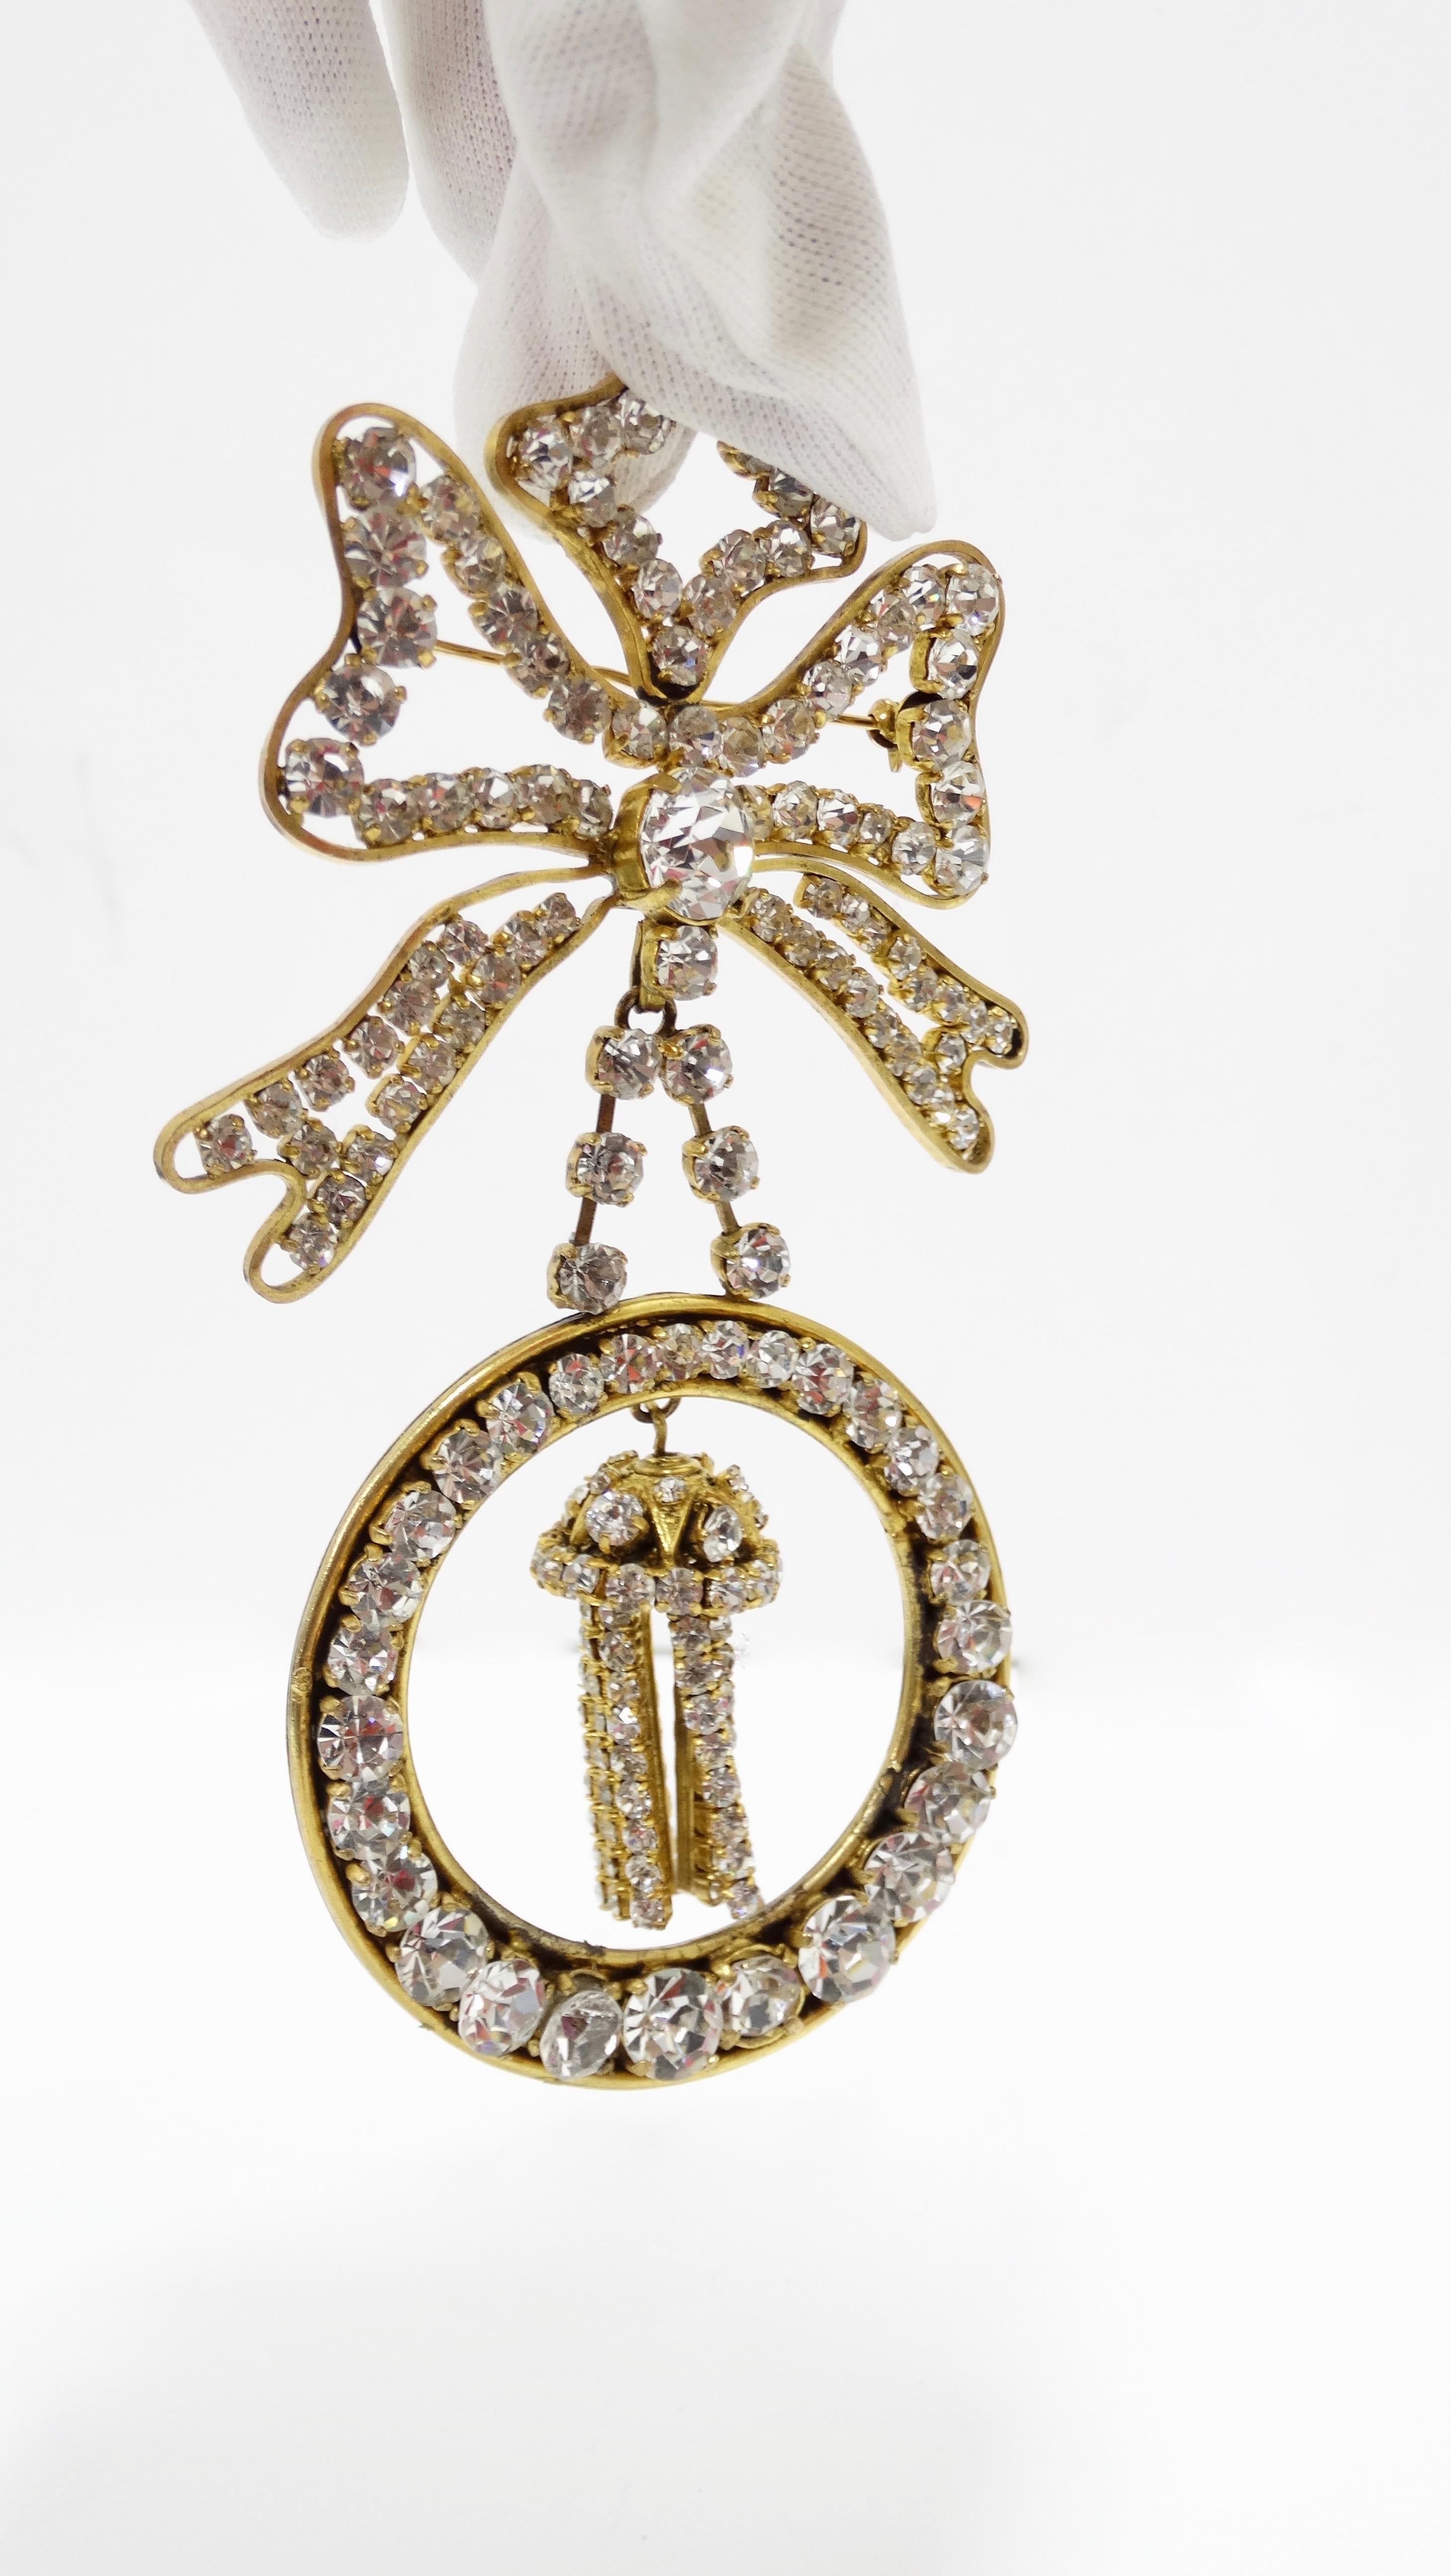 Chanel 1980s Haute Couture Statement Brooch  1